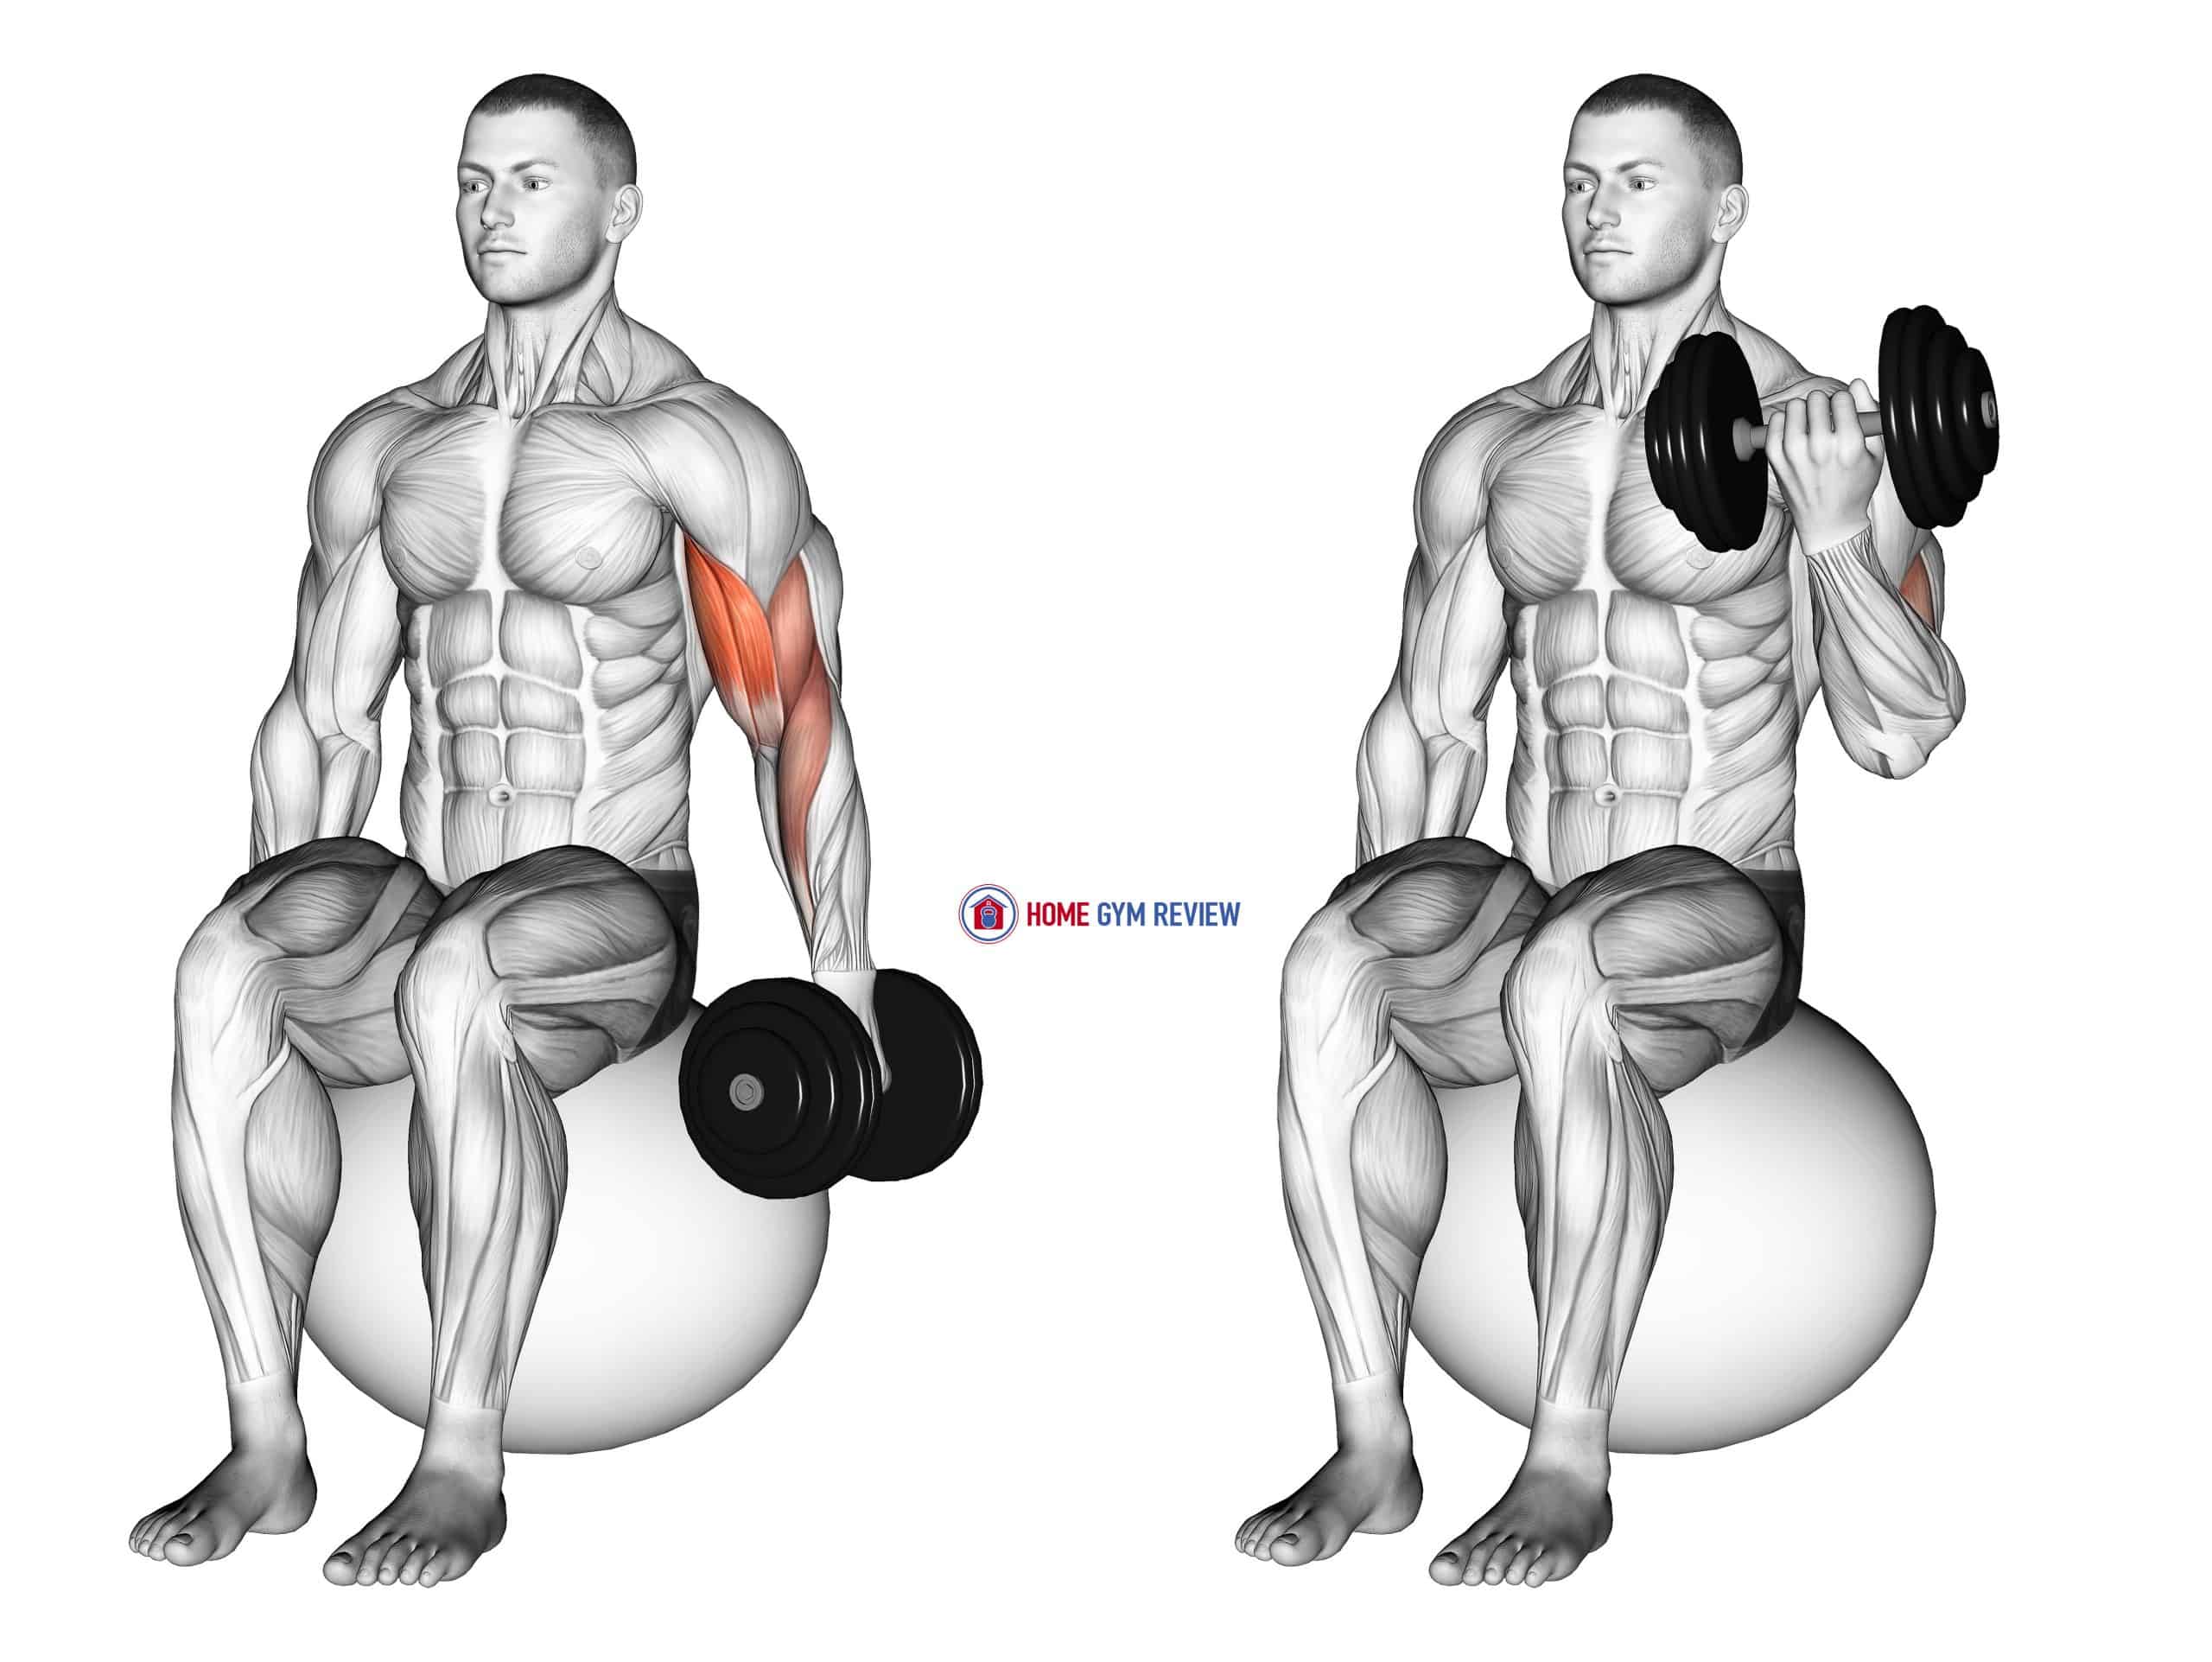 Dumbbell One Arm Seated Bicep Curl on Exercise Ball